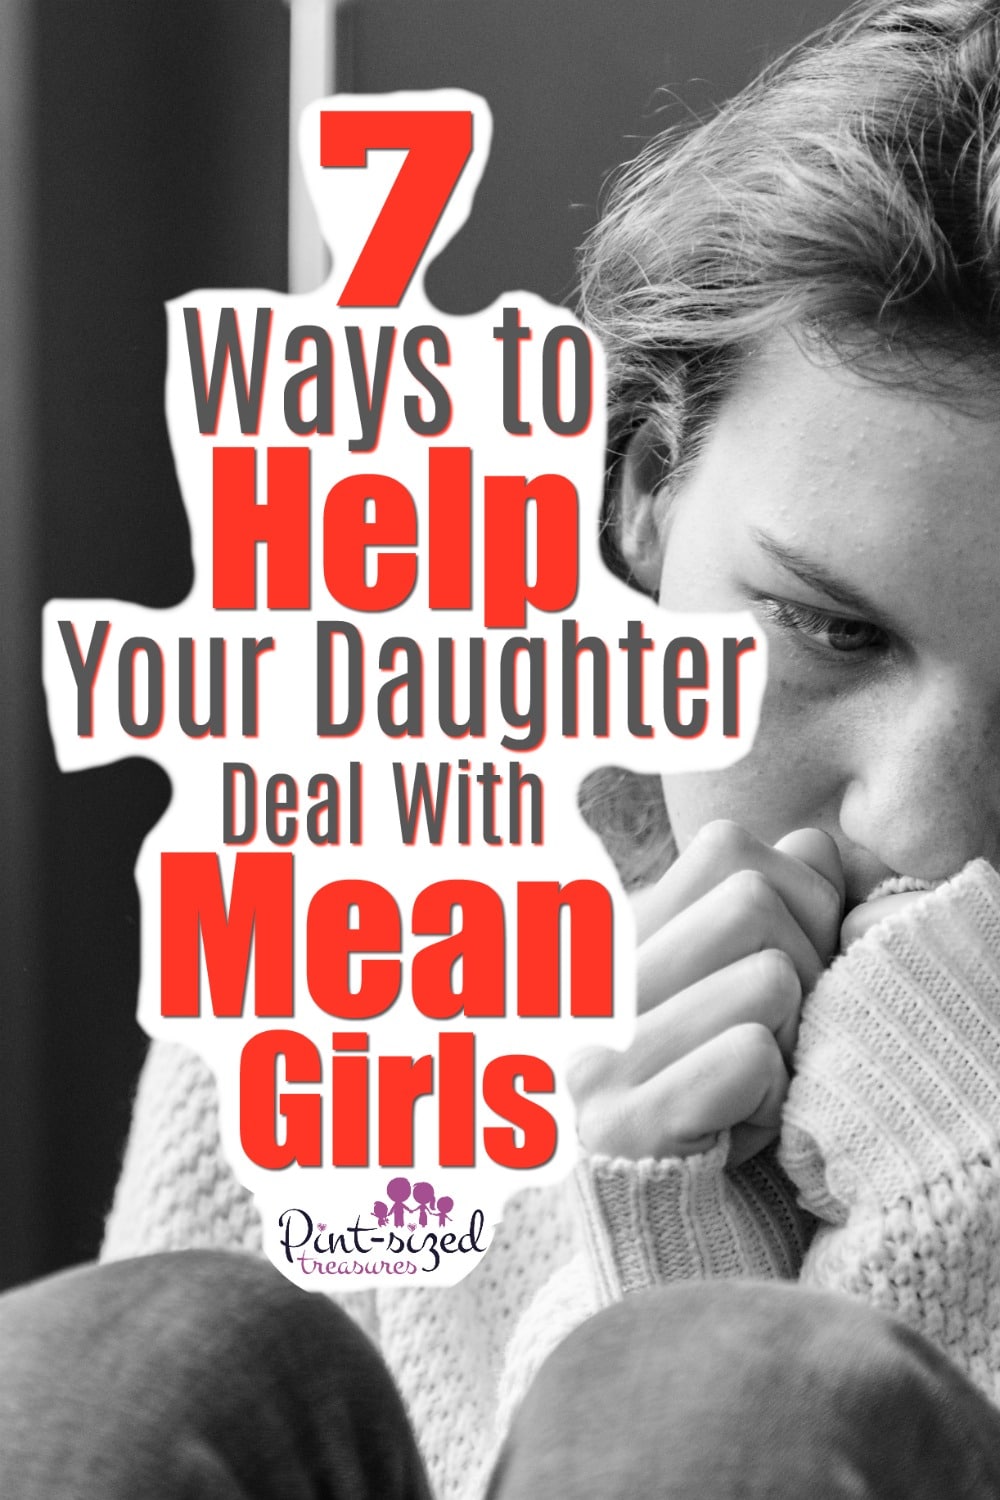 How to help your daughter deal with mean girls